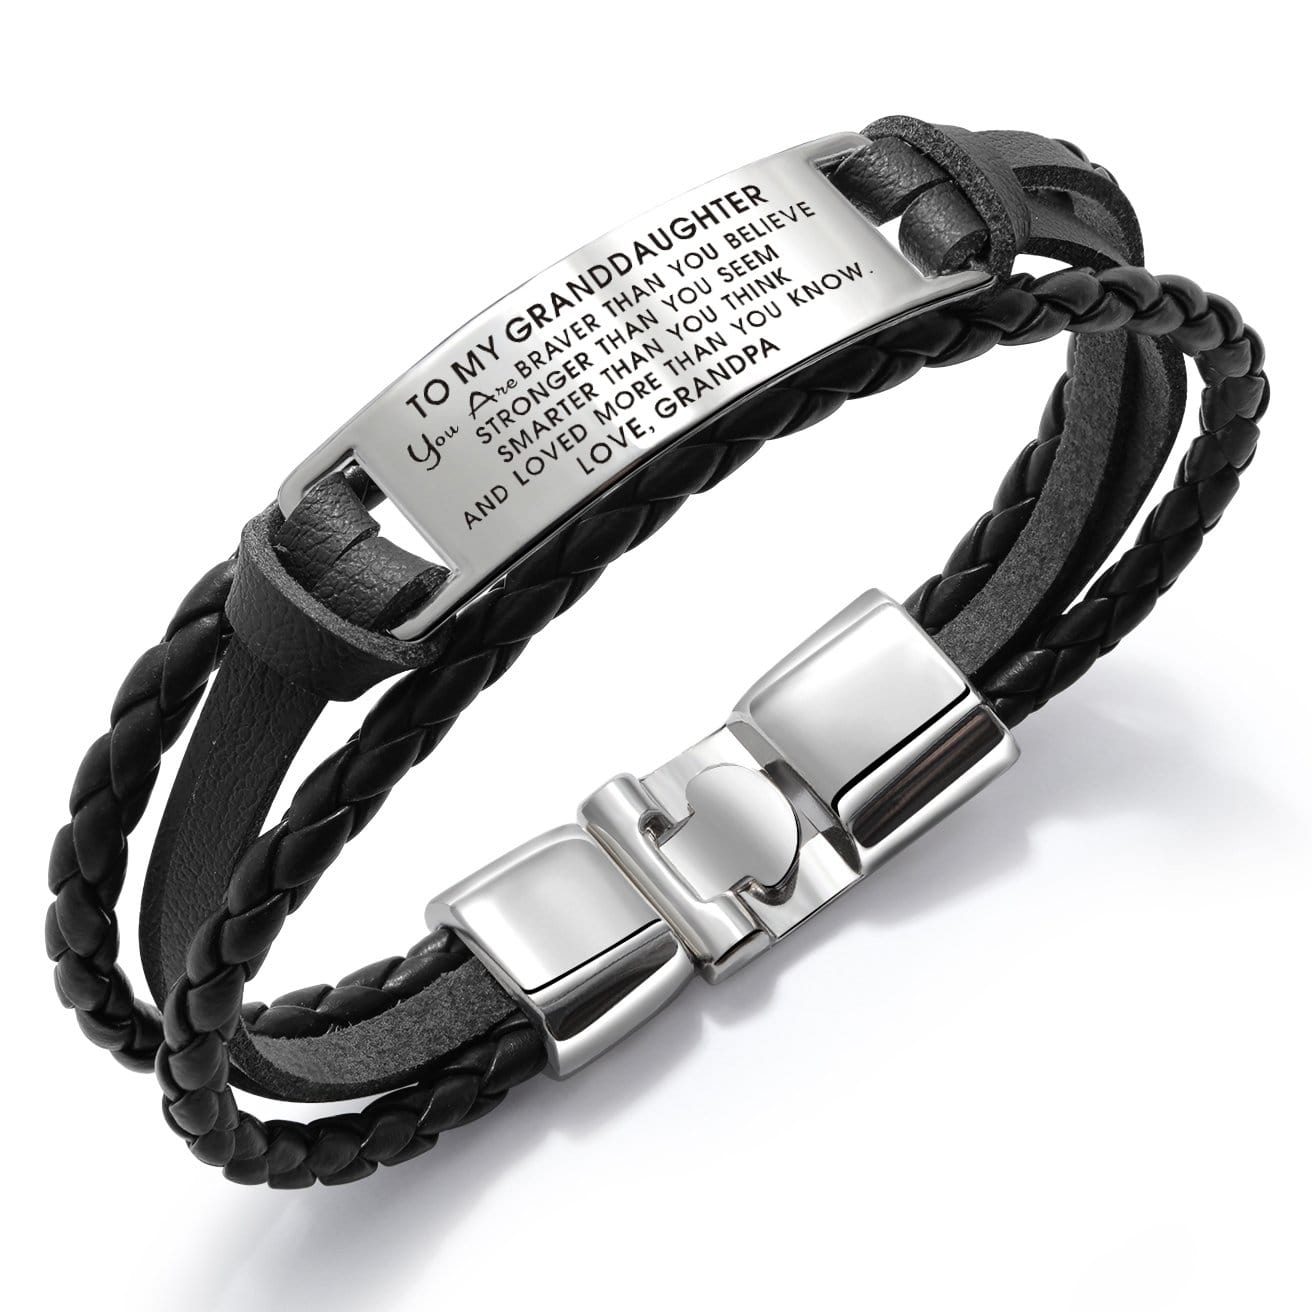 Bracelets Grandpa To Granddaughter - You Are Loved More Than You Know Leather Bracelet Black GiveMe-Gifts